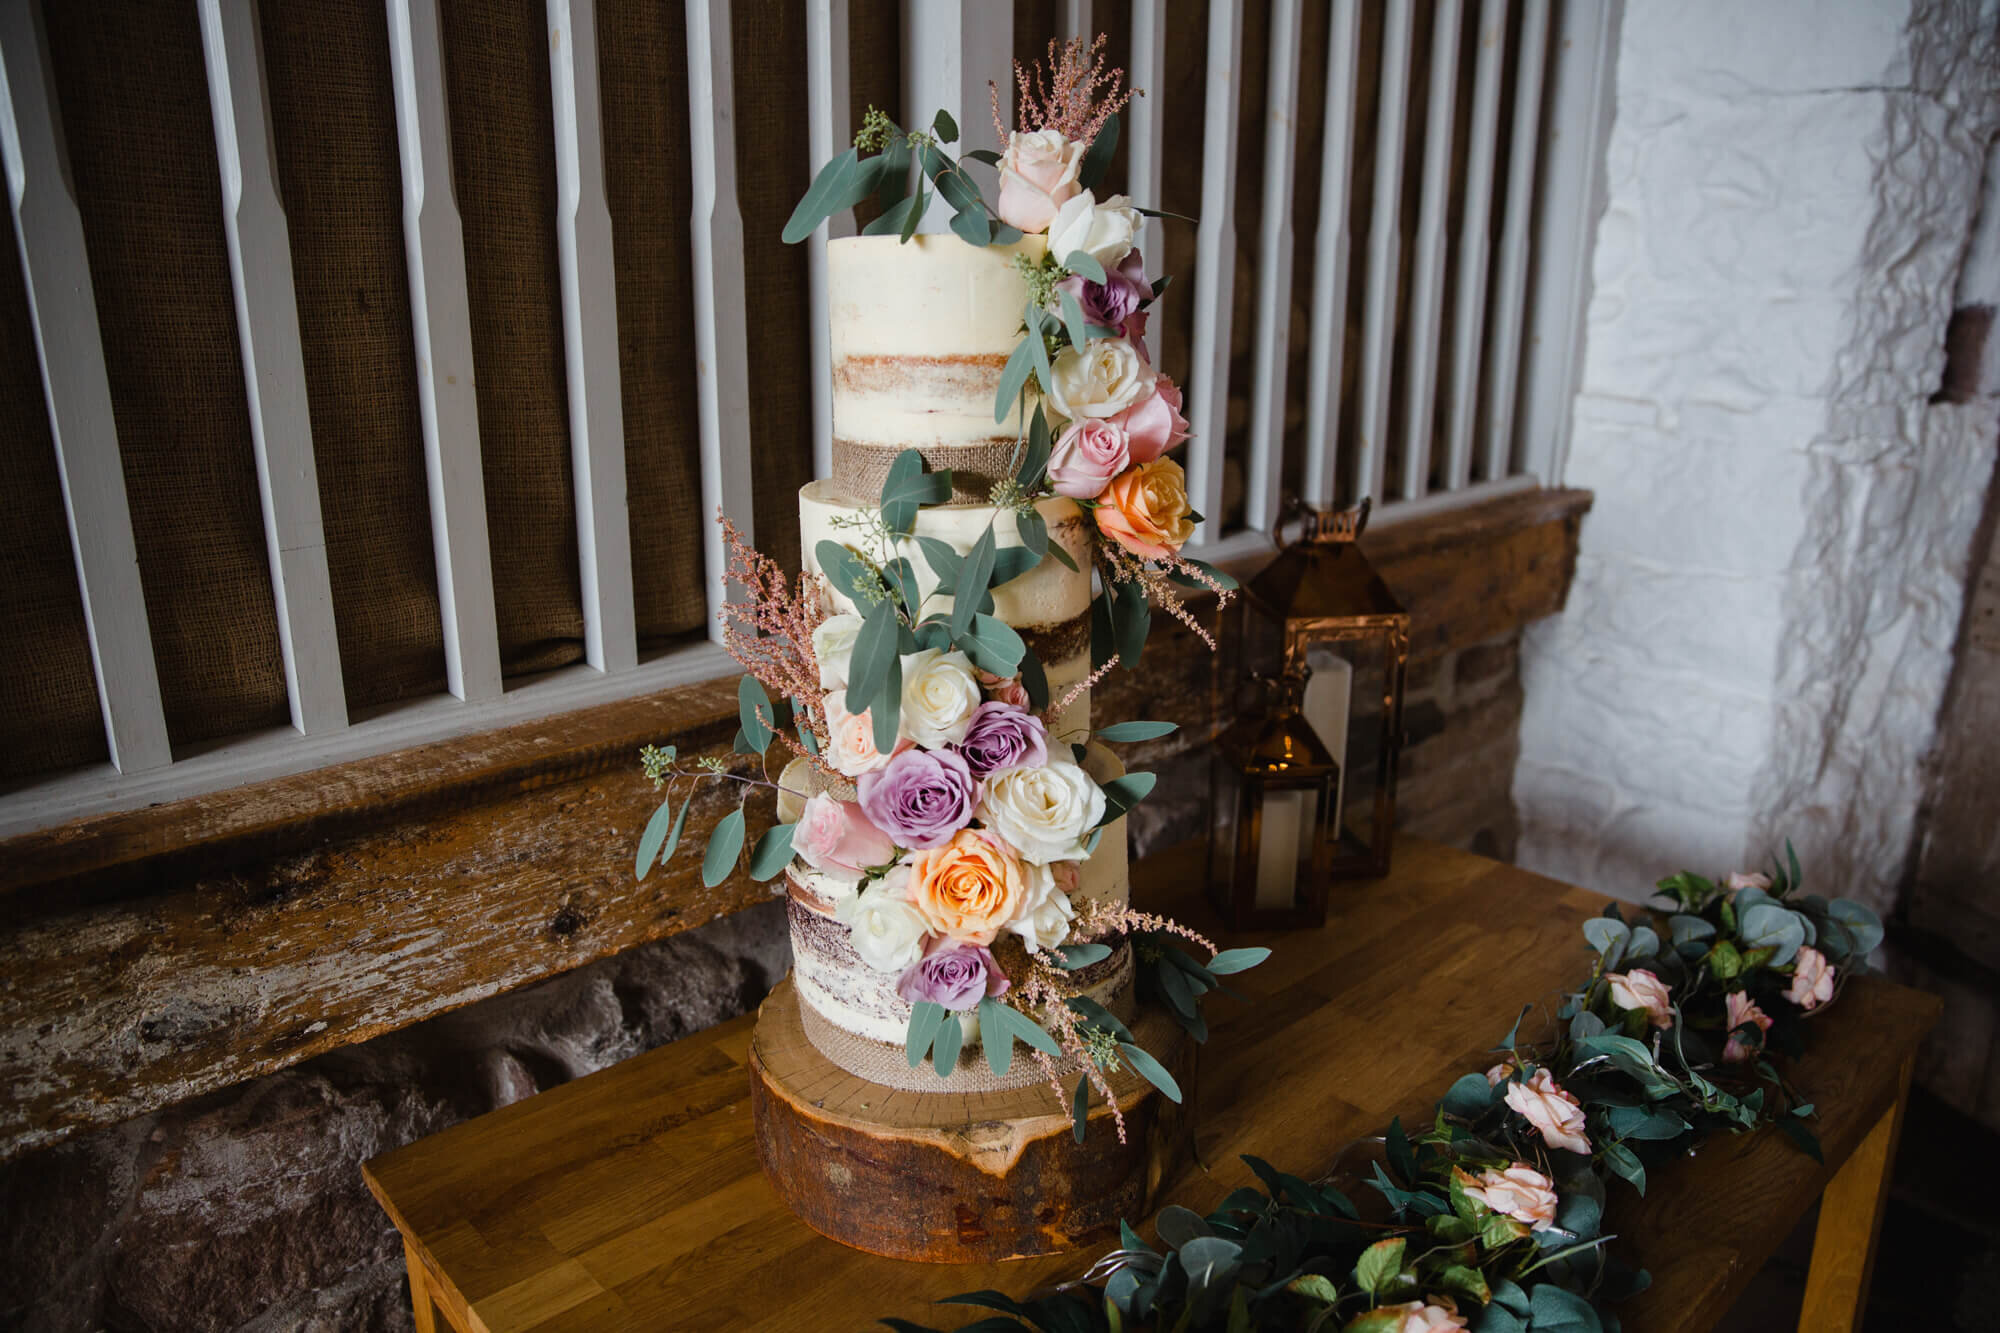 wedding cake dressed with flowers on table